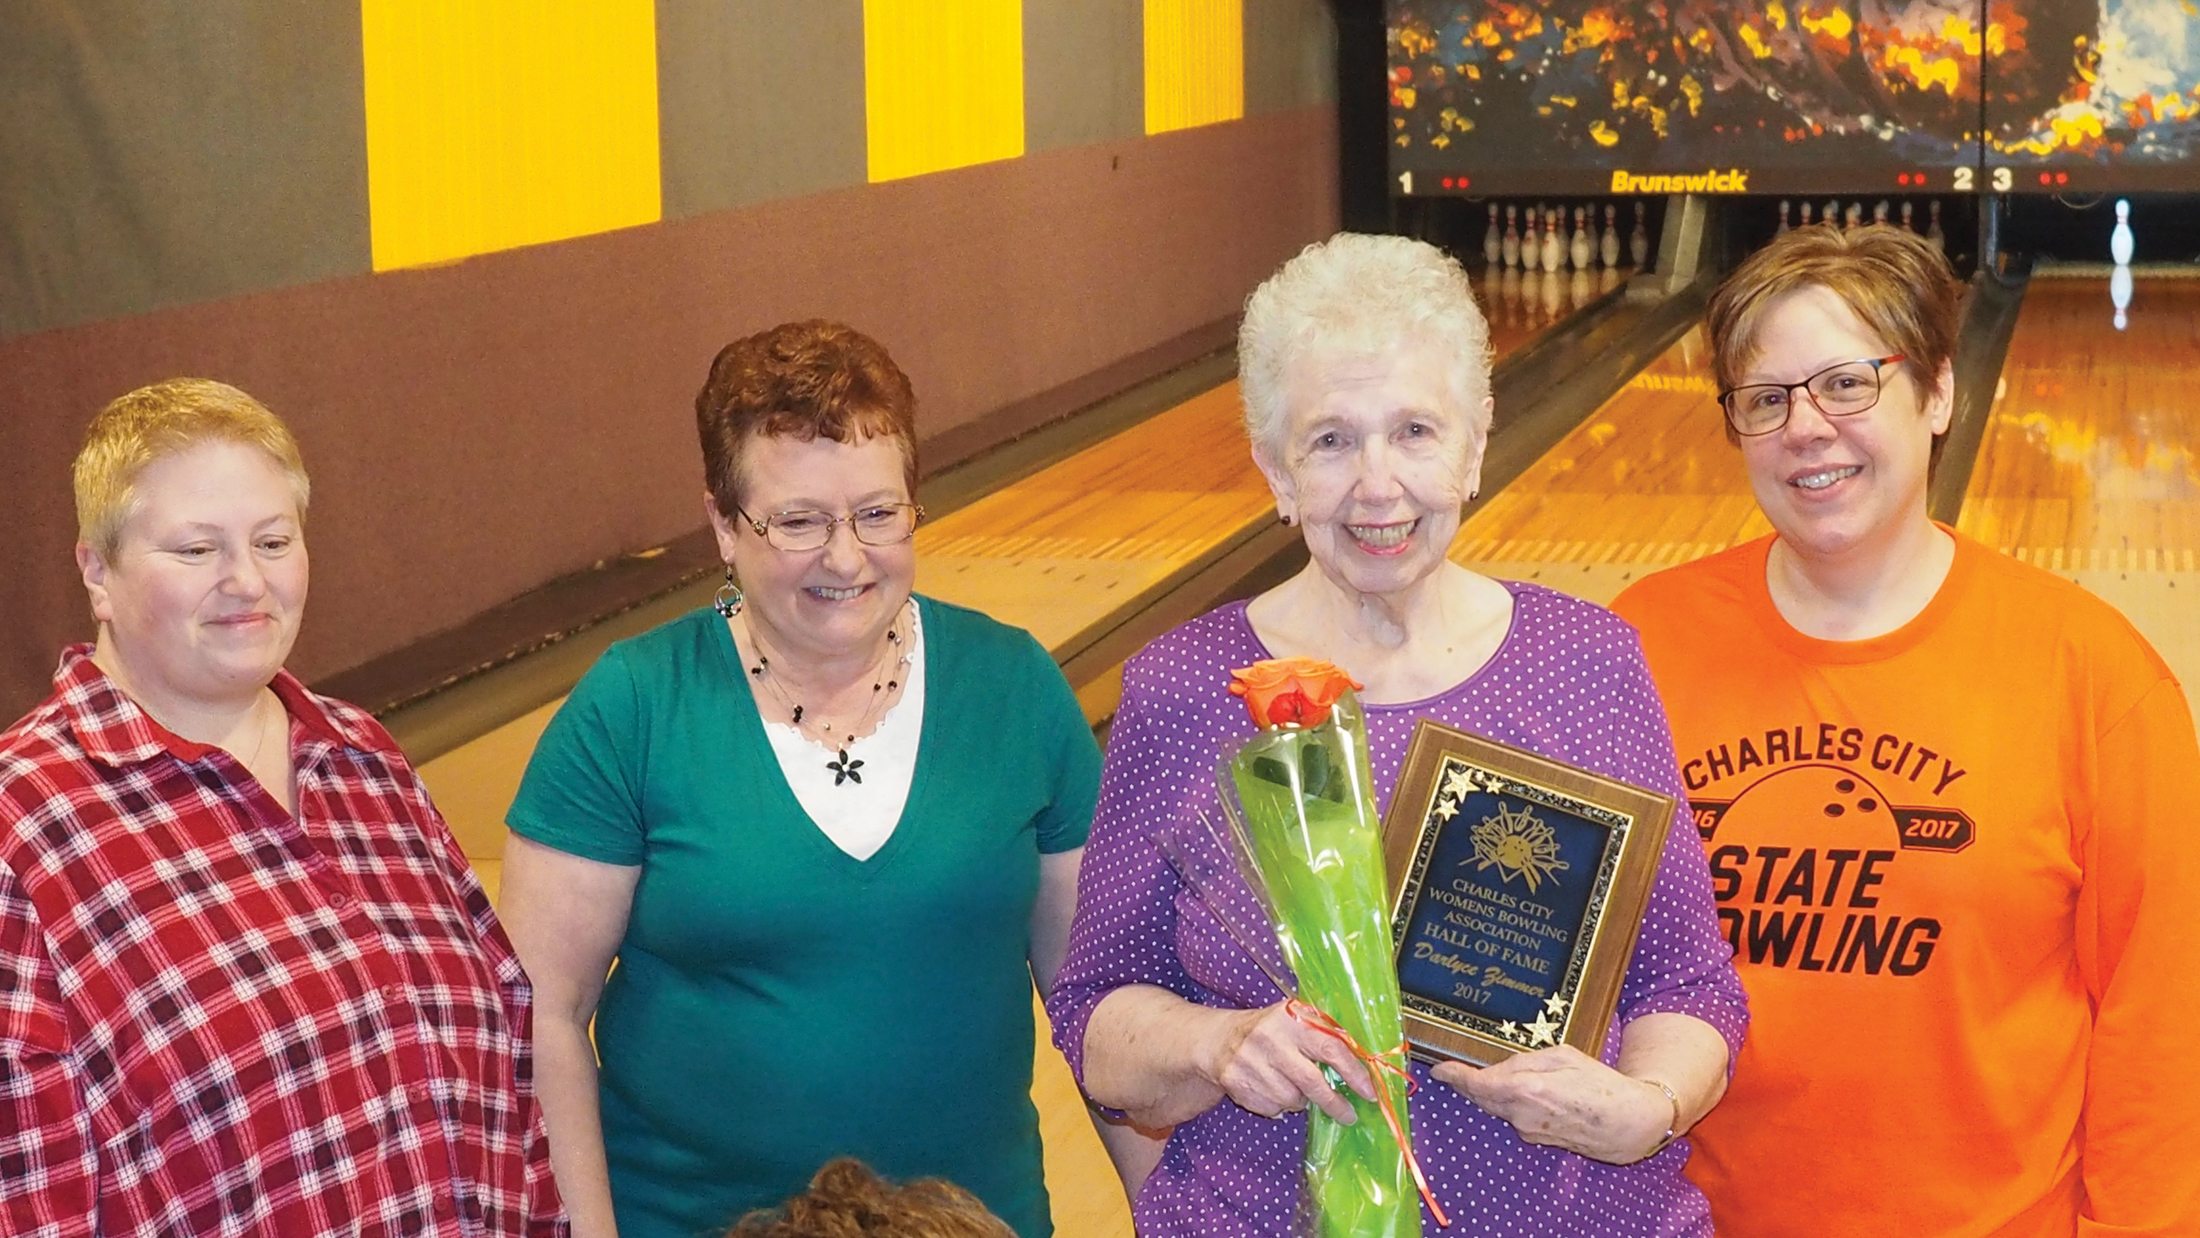 Darlyce Zimmer inducted into the Charles City Women’s Bowling Association Hall of Fame